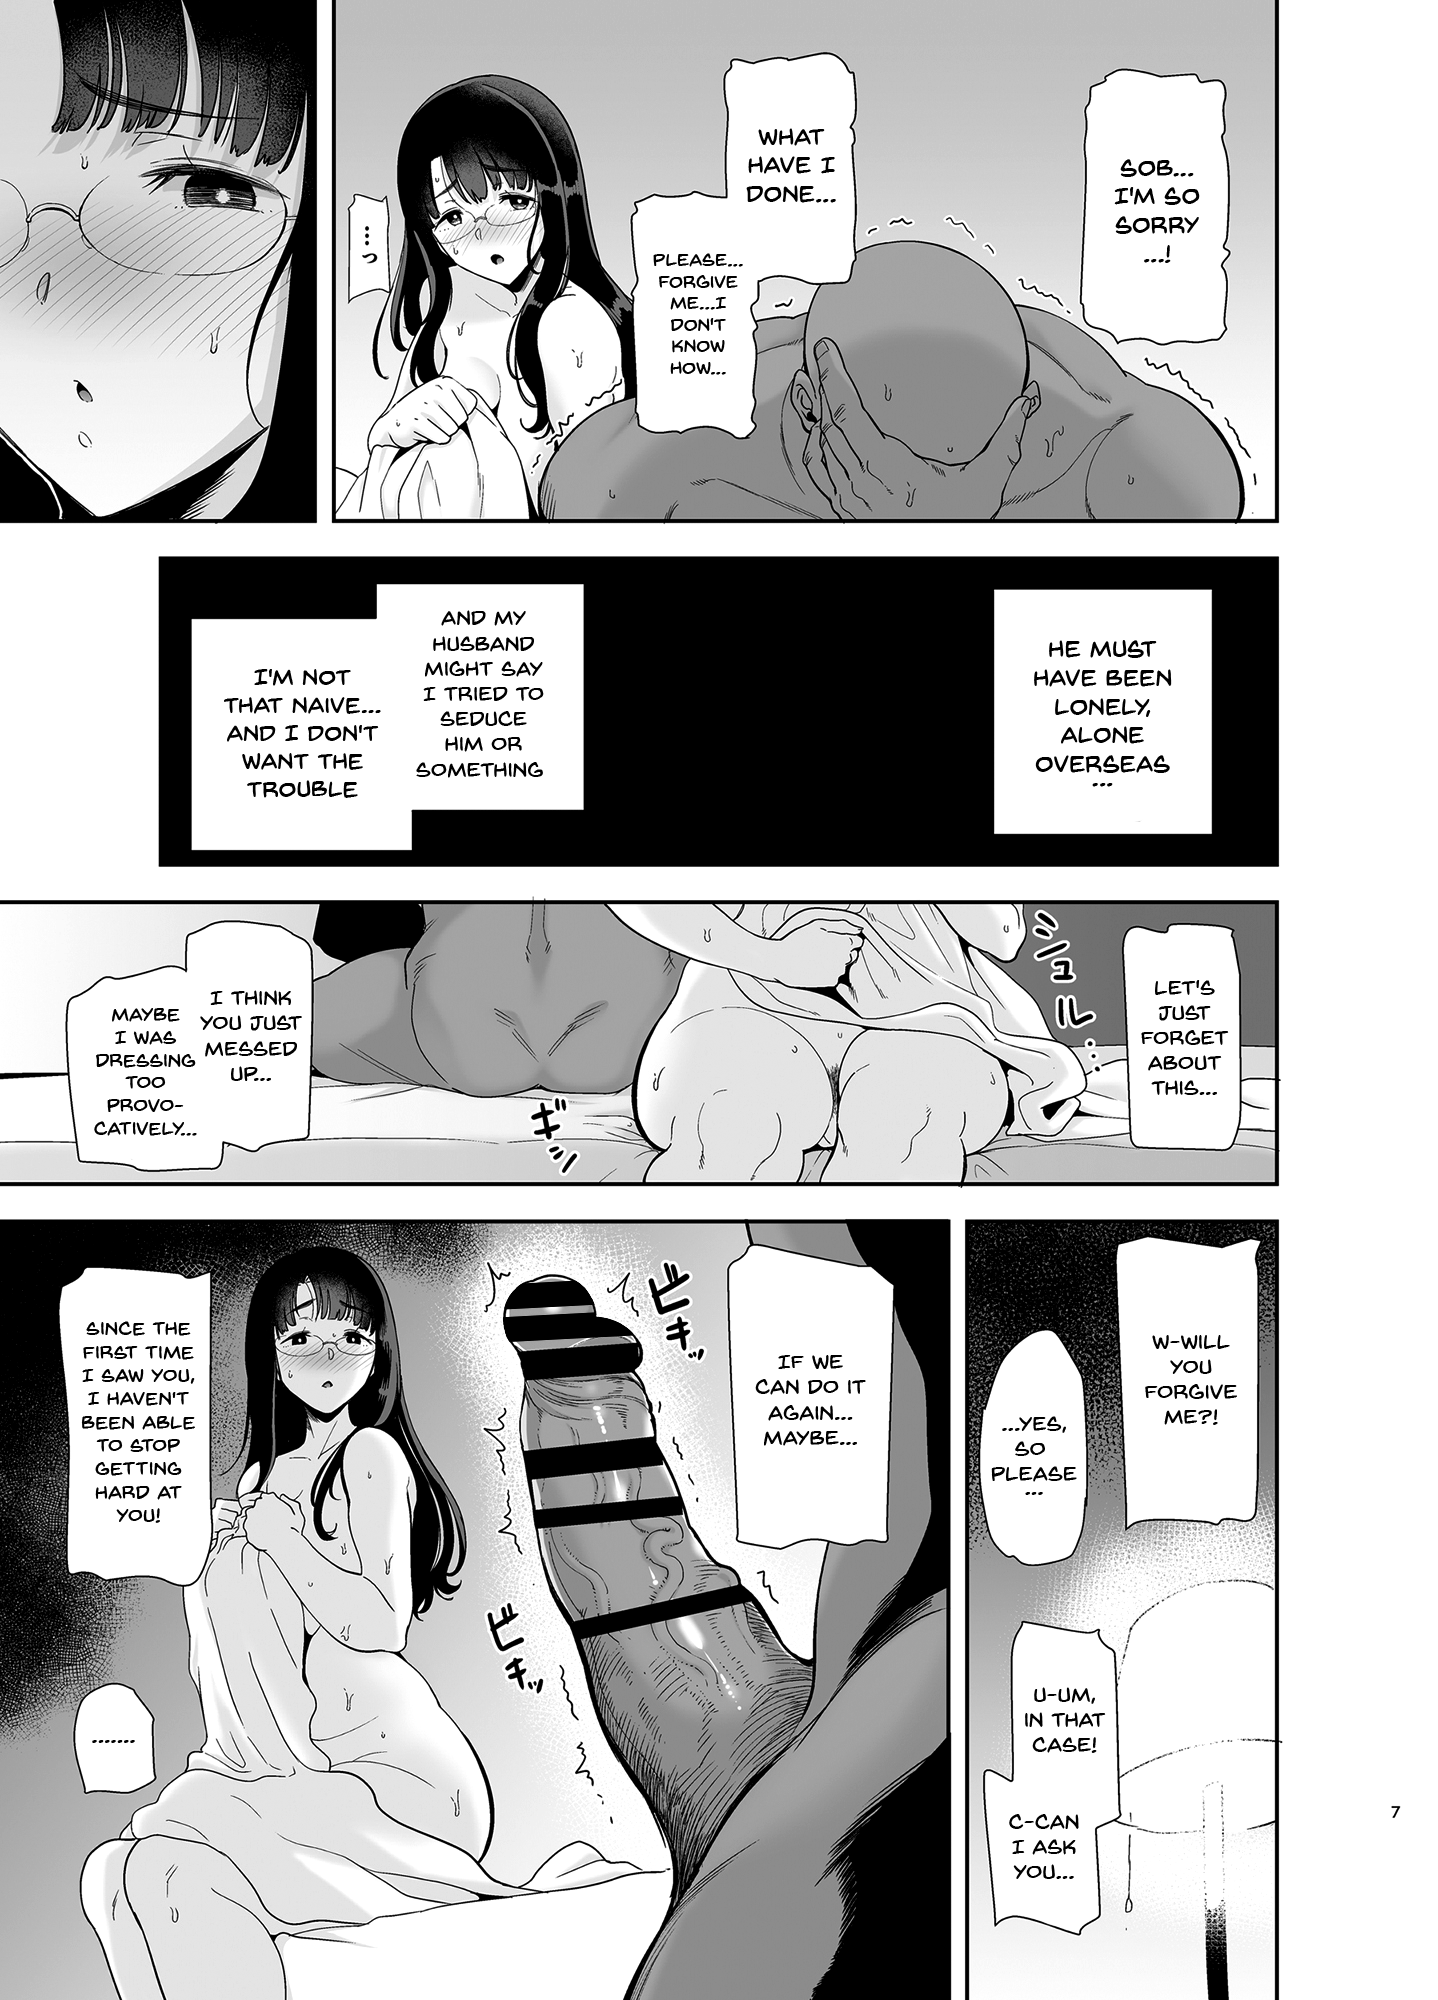 Wild Method 1 - Busty manga housewife is fucked by horny black student - NTR comics image